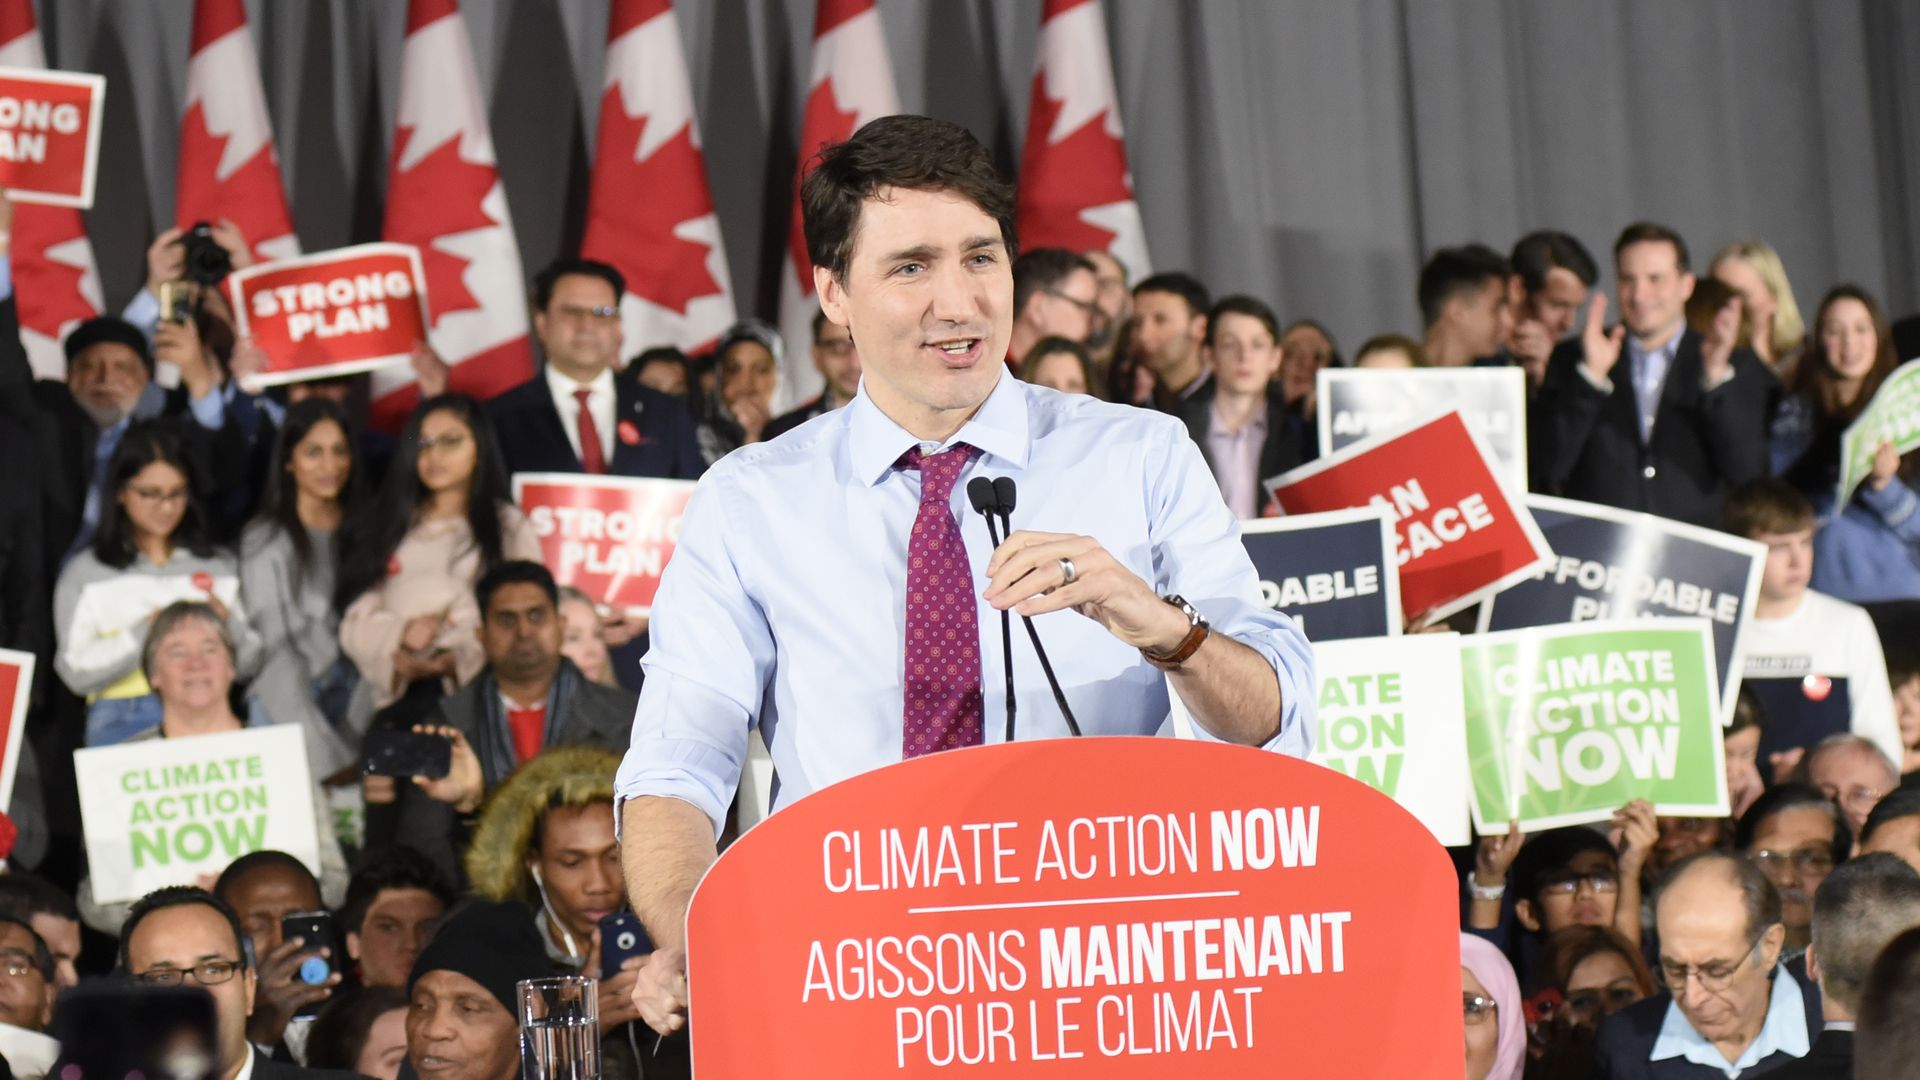 Trudeau heckled during climate speech after second minister resigns - Axios1920 x 1080